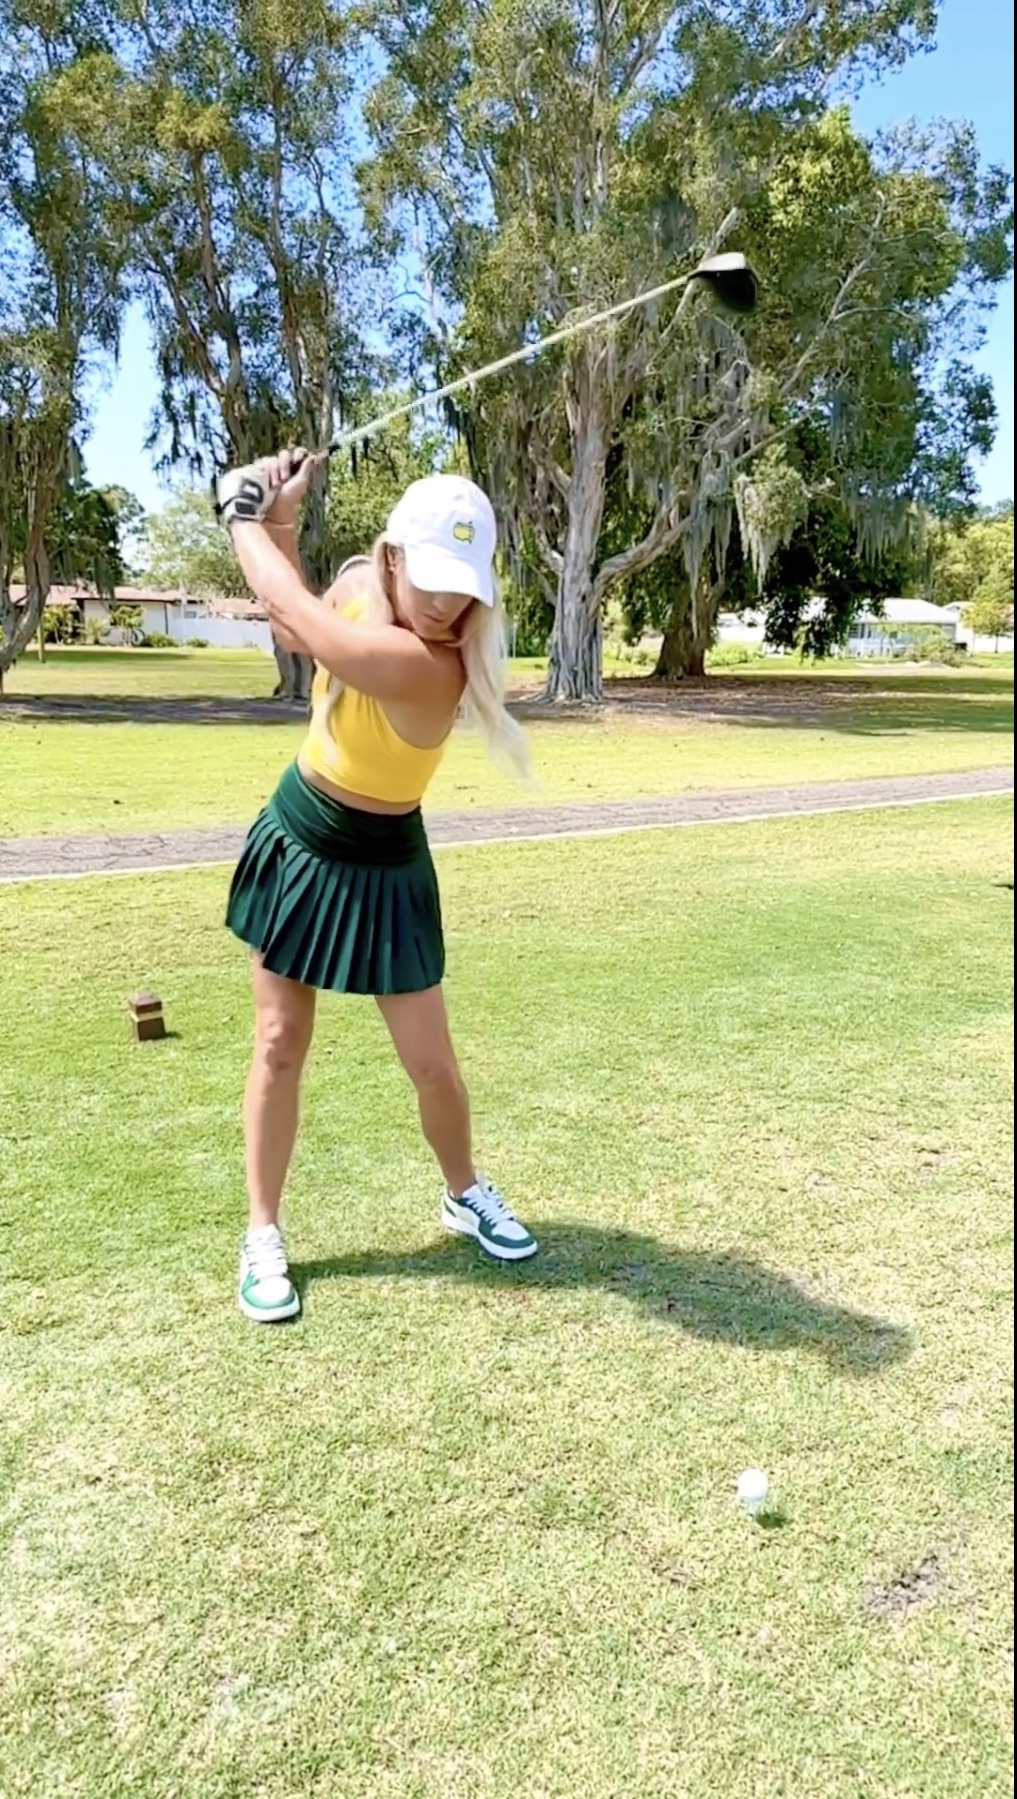 Karin only picked up golf four years after graduating from college